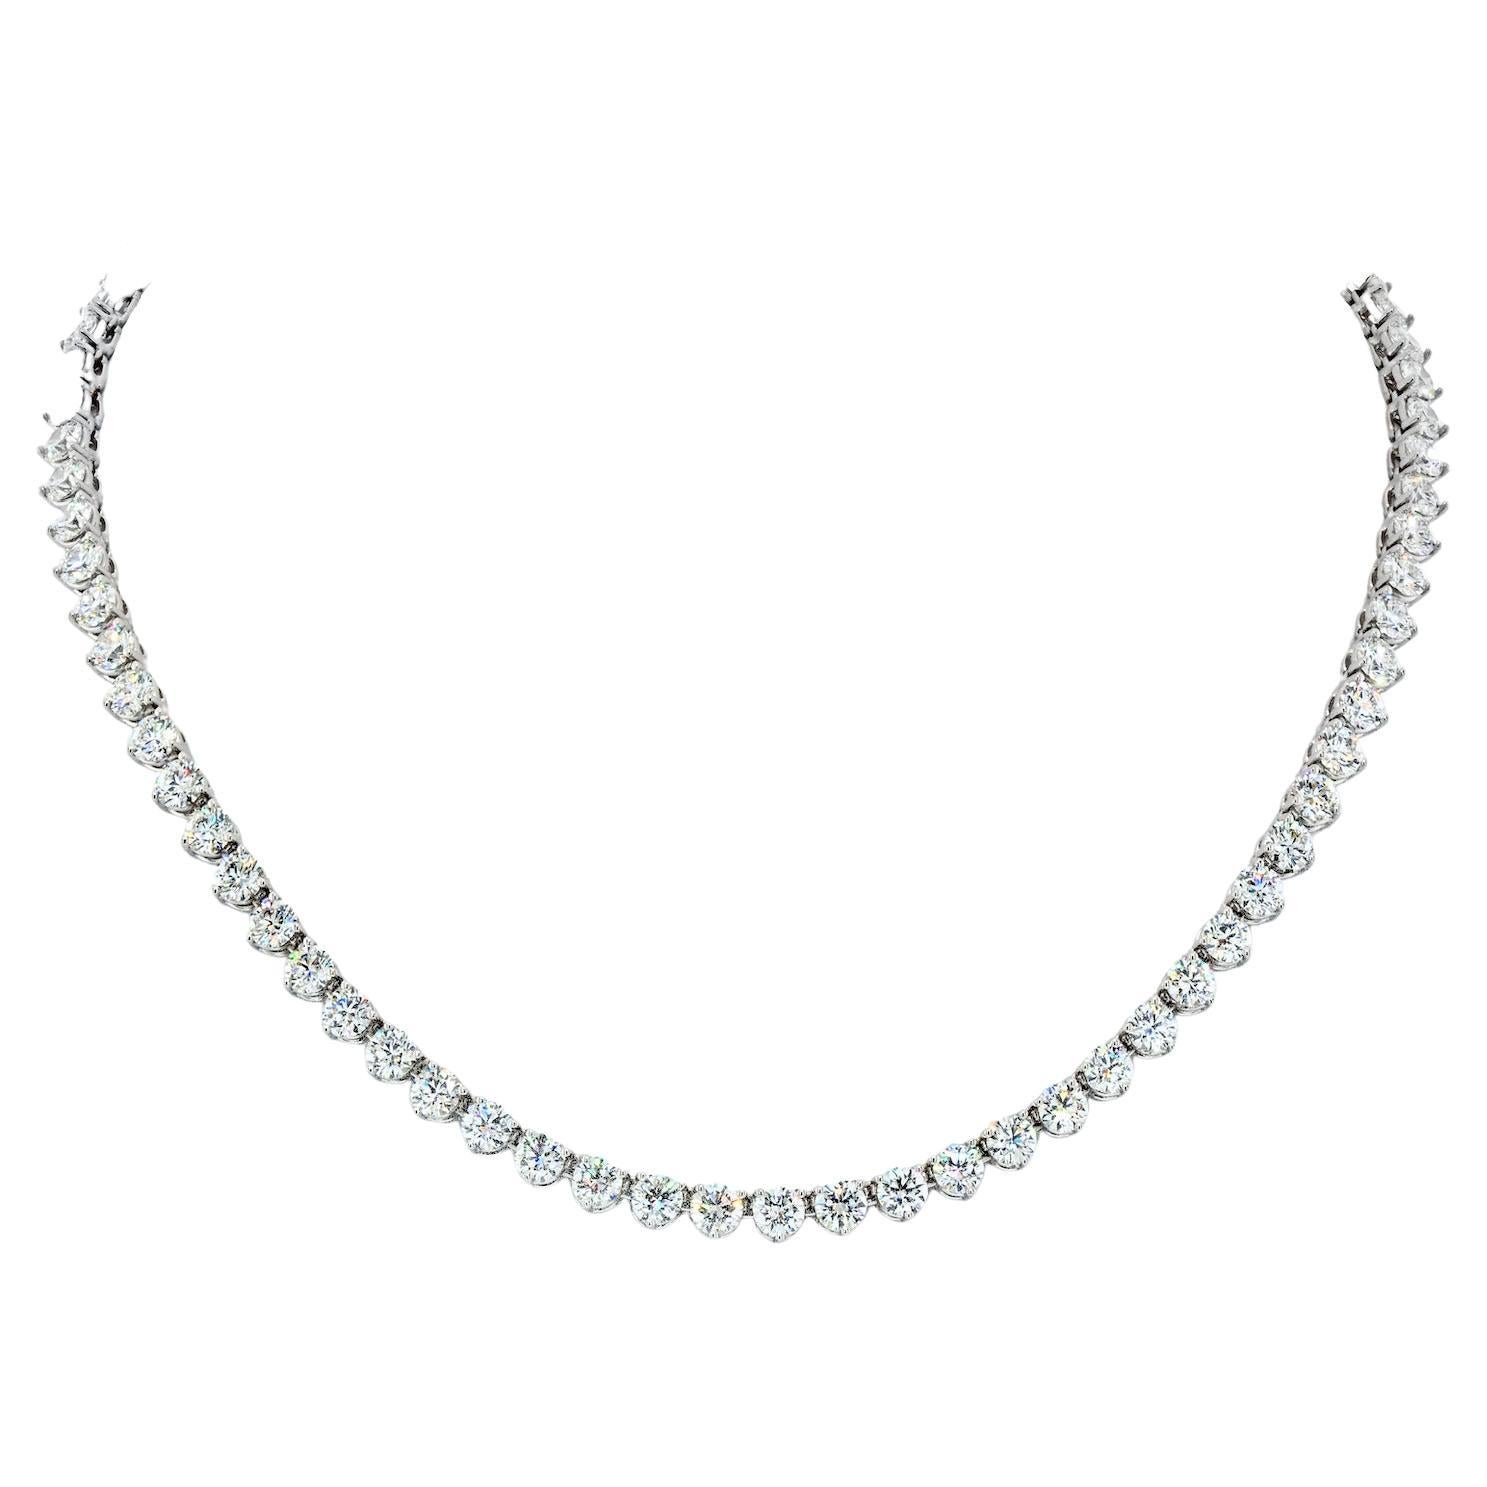 Louis Newman & Co GIA Diamond Straight Line Tennis Necklace with 25.24 Carats For Sale